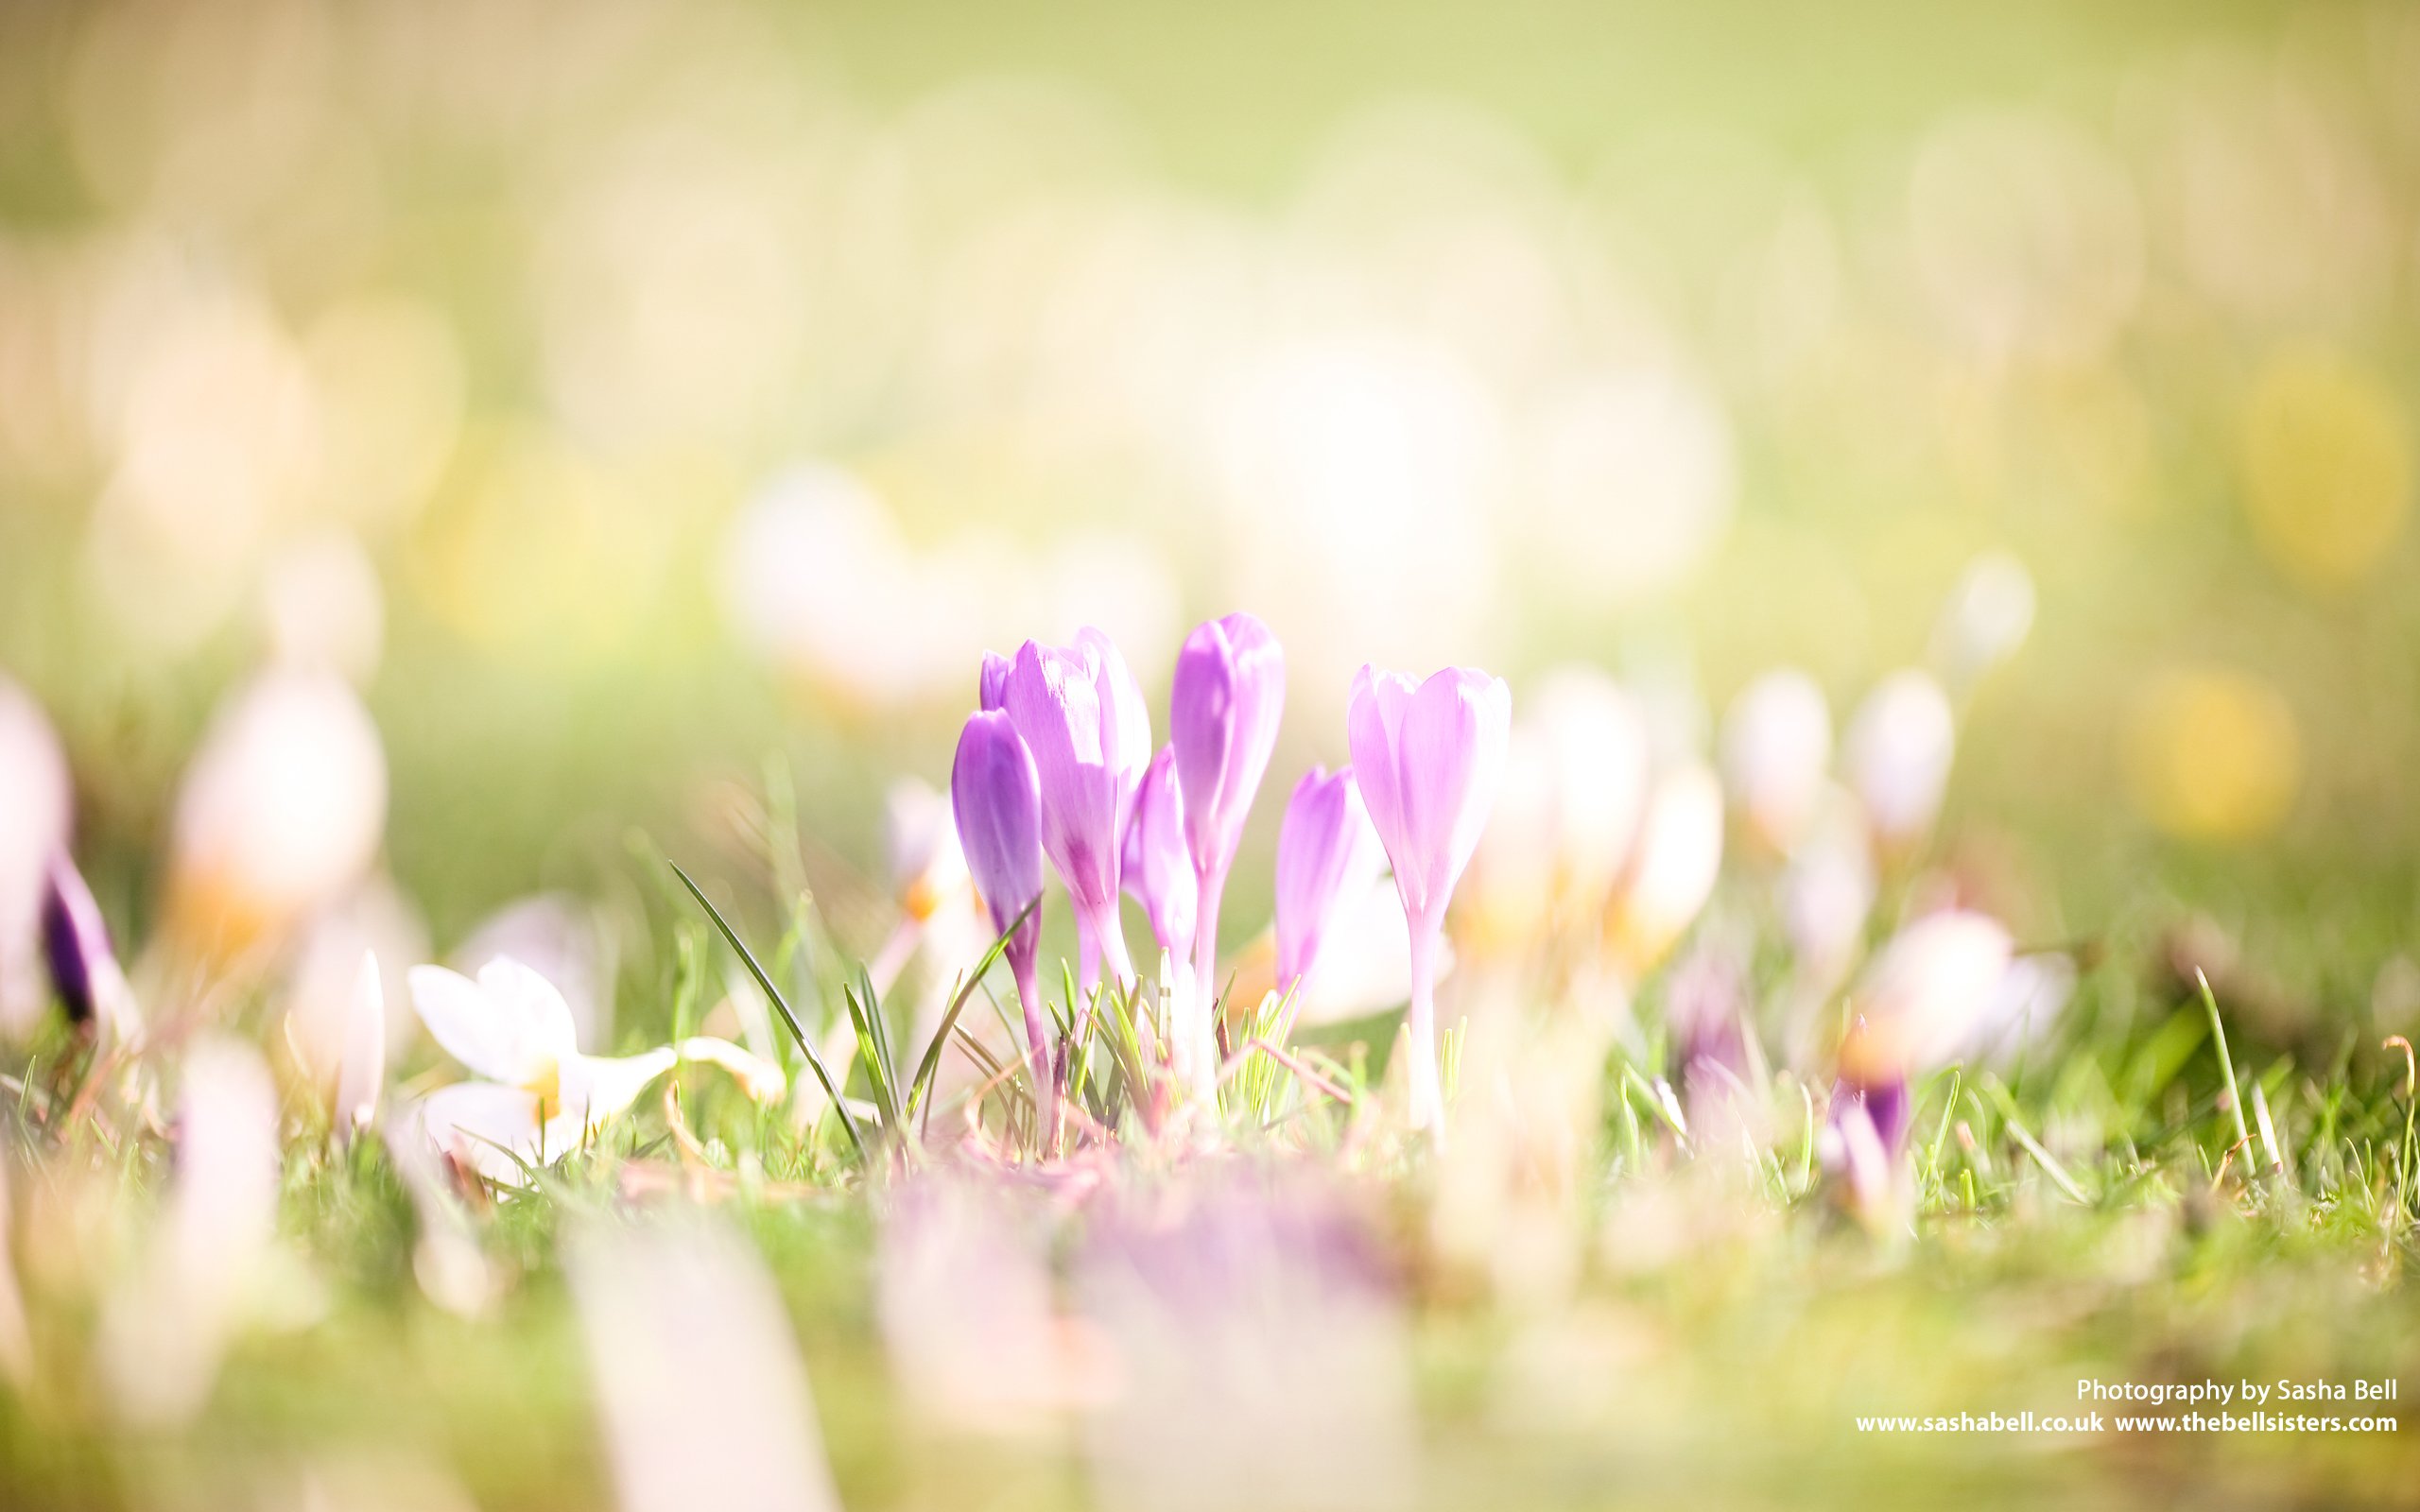 Early Spring   March Wallpaper Flickr   Photo Sharing